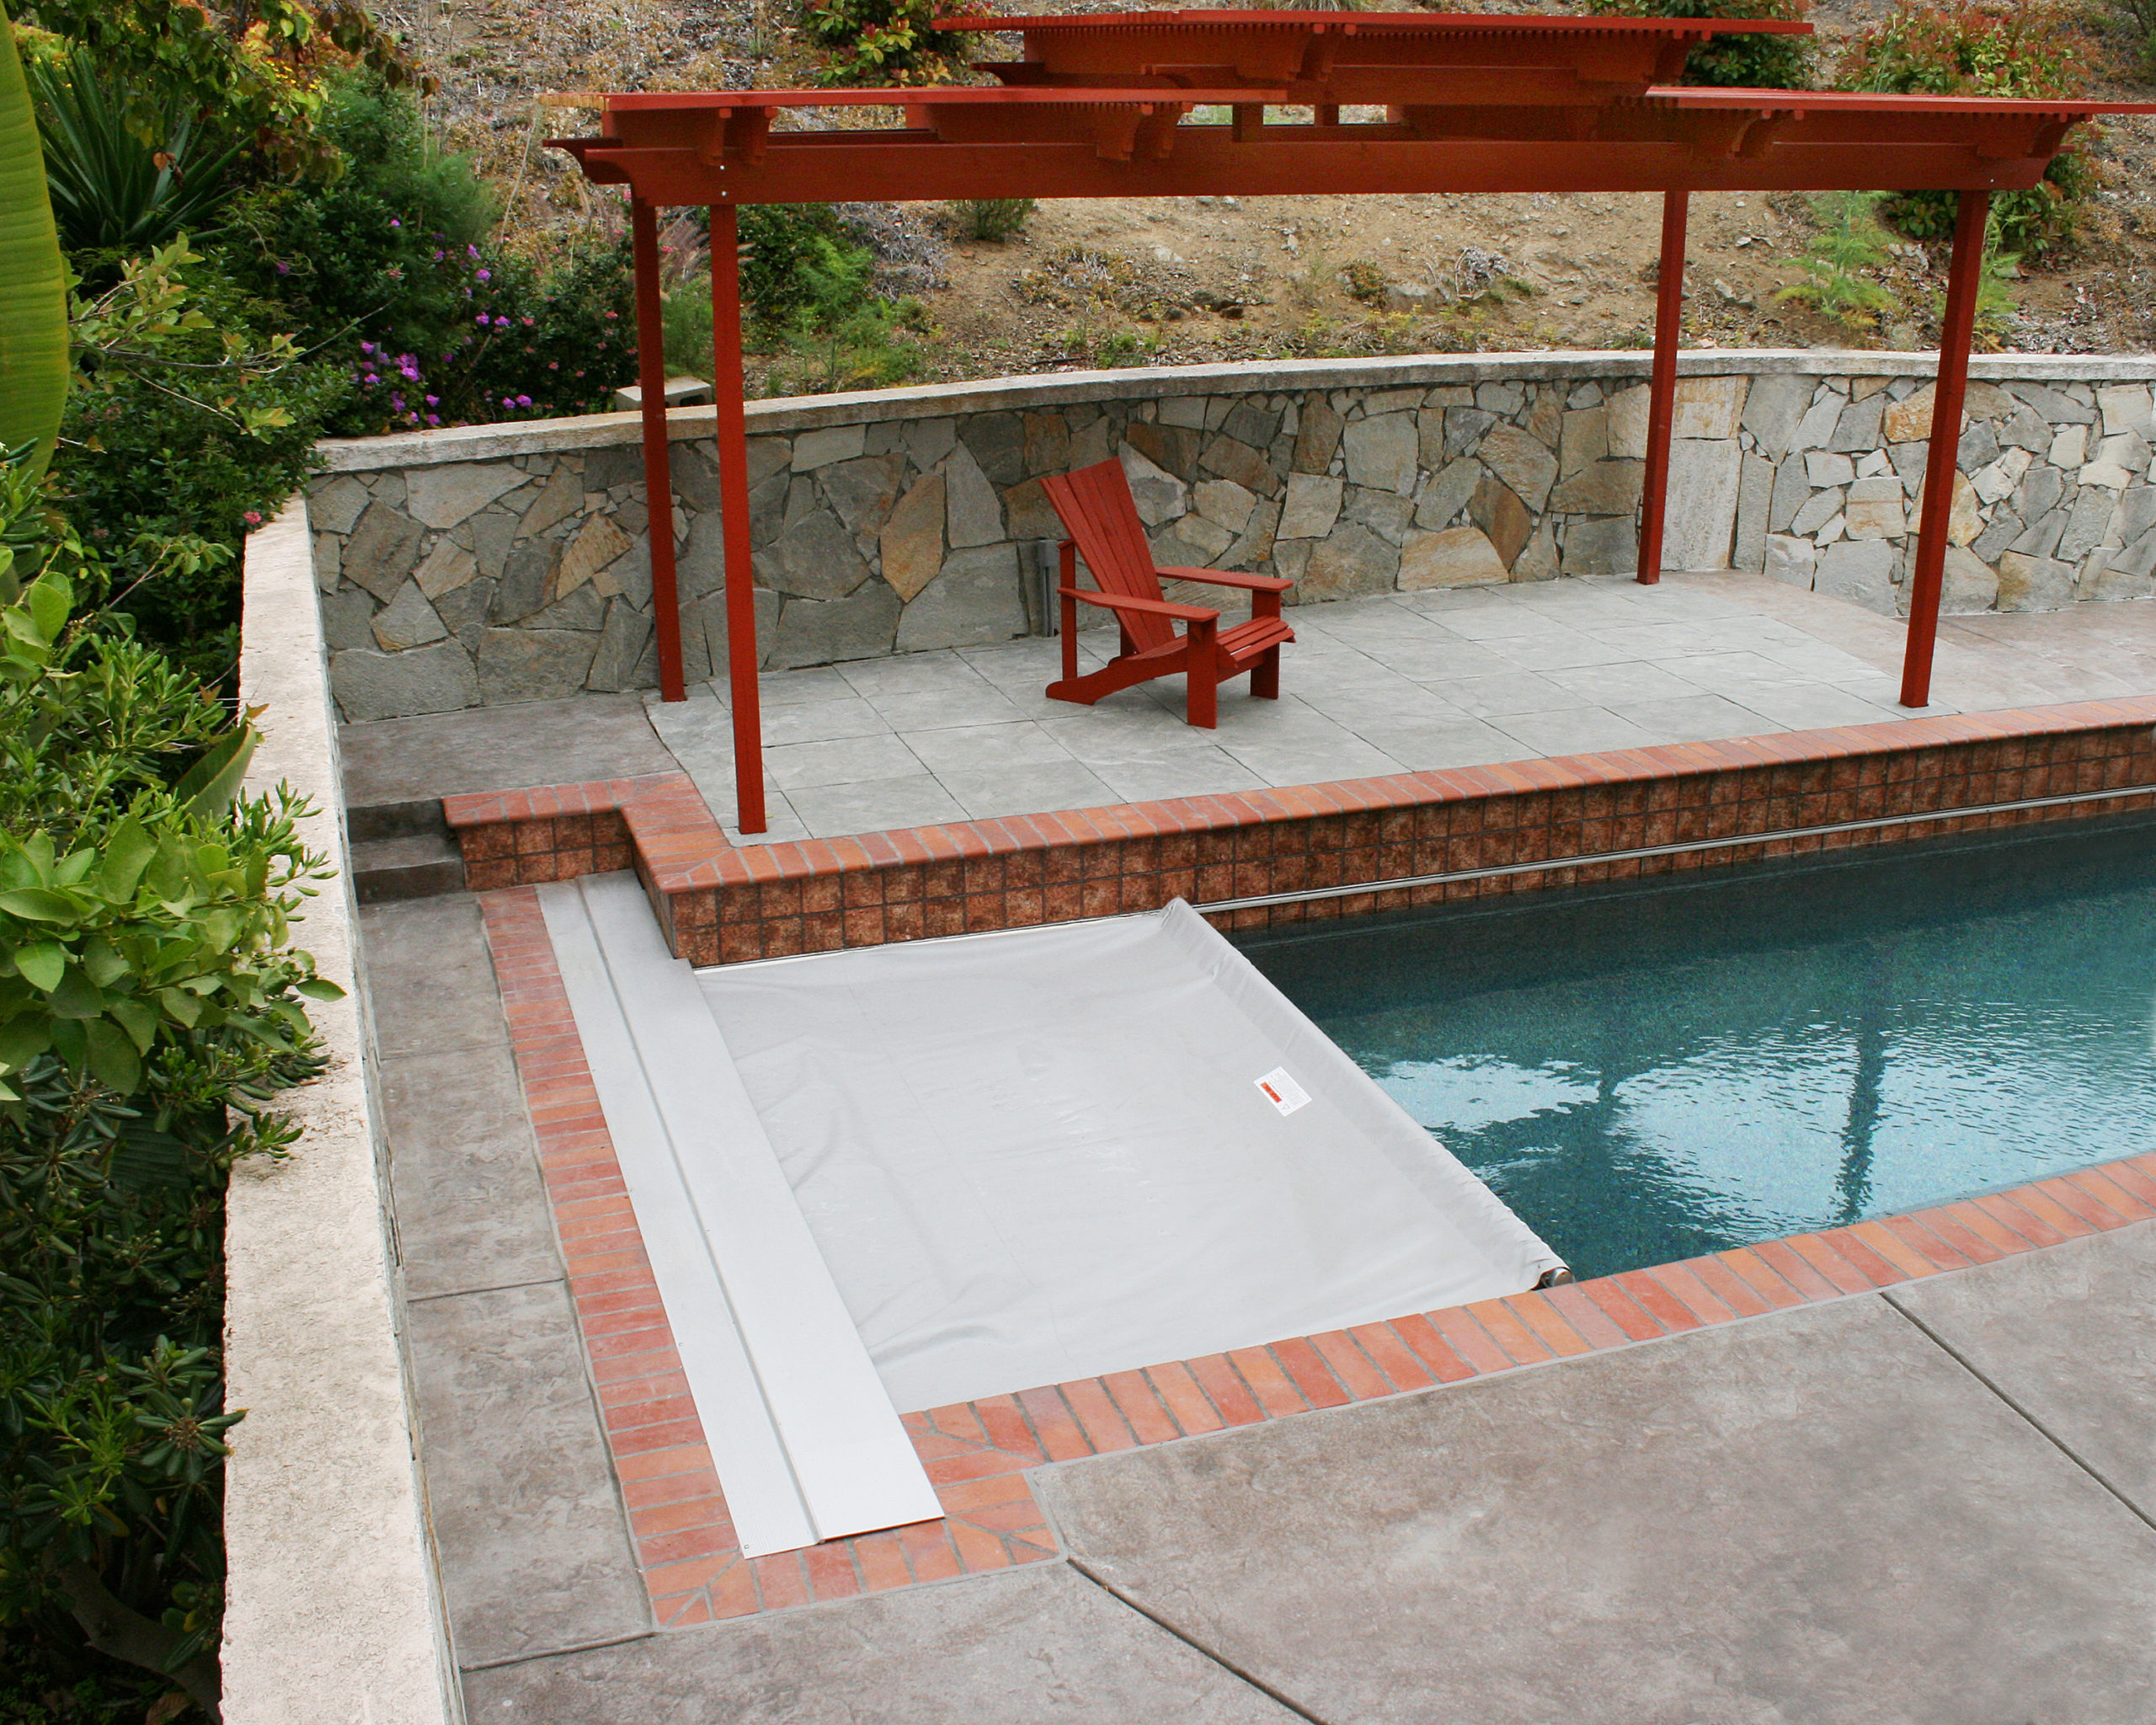 San Diego, California - Shown In Image: Brick Coping, Standard Autocover Lid, Top Track